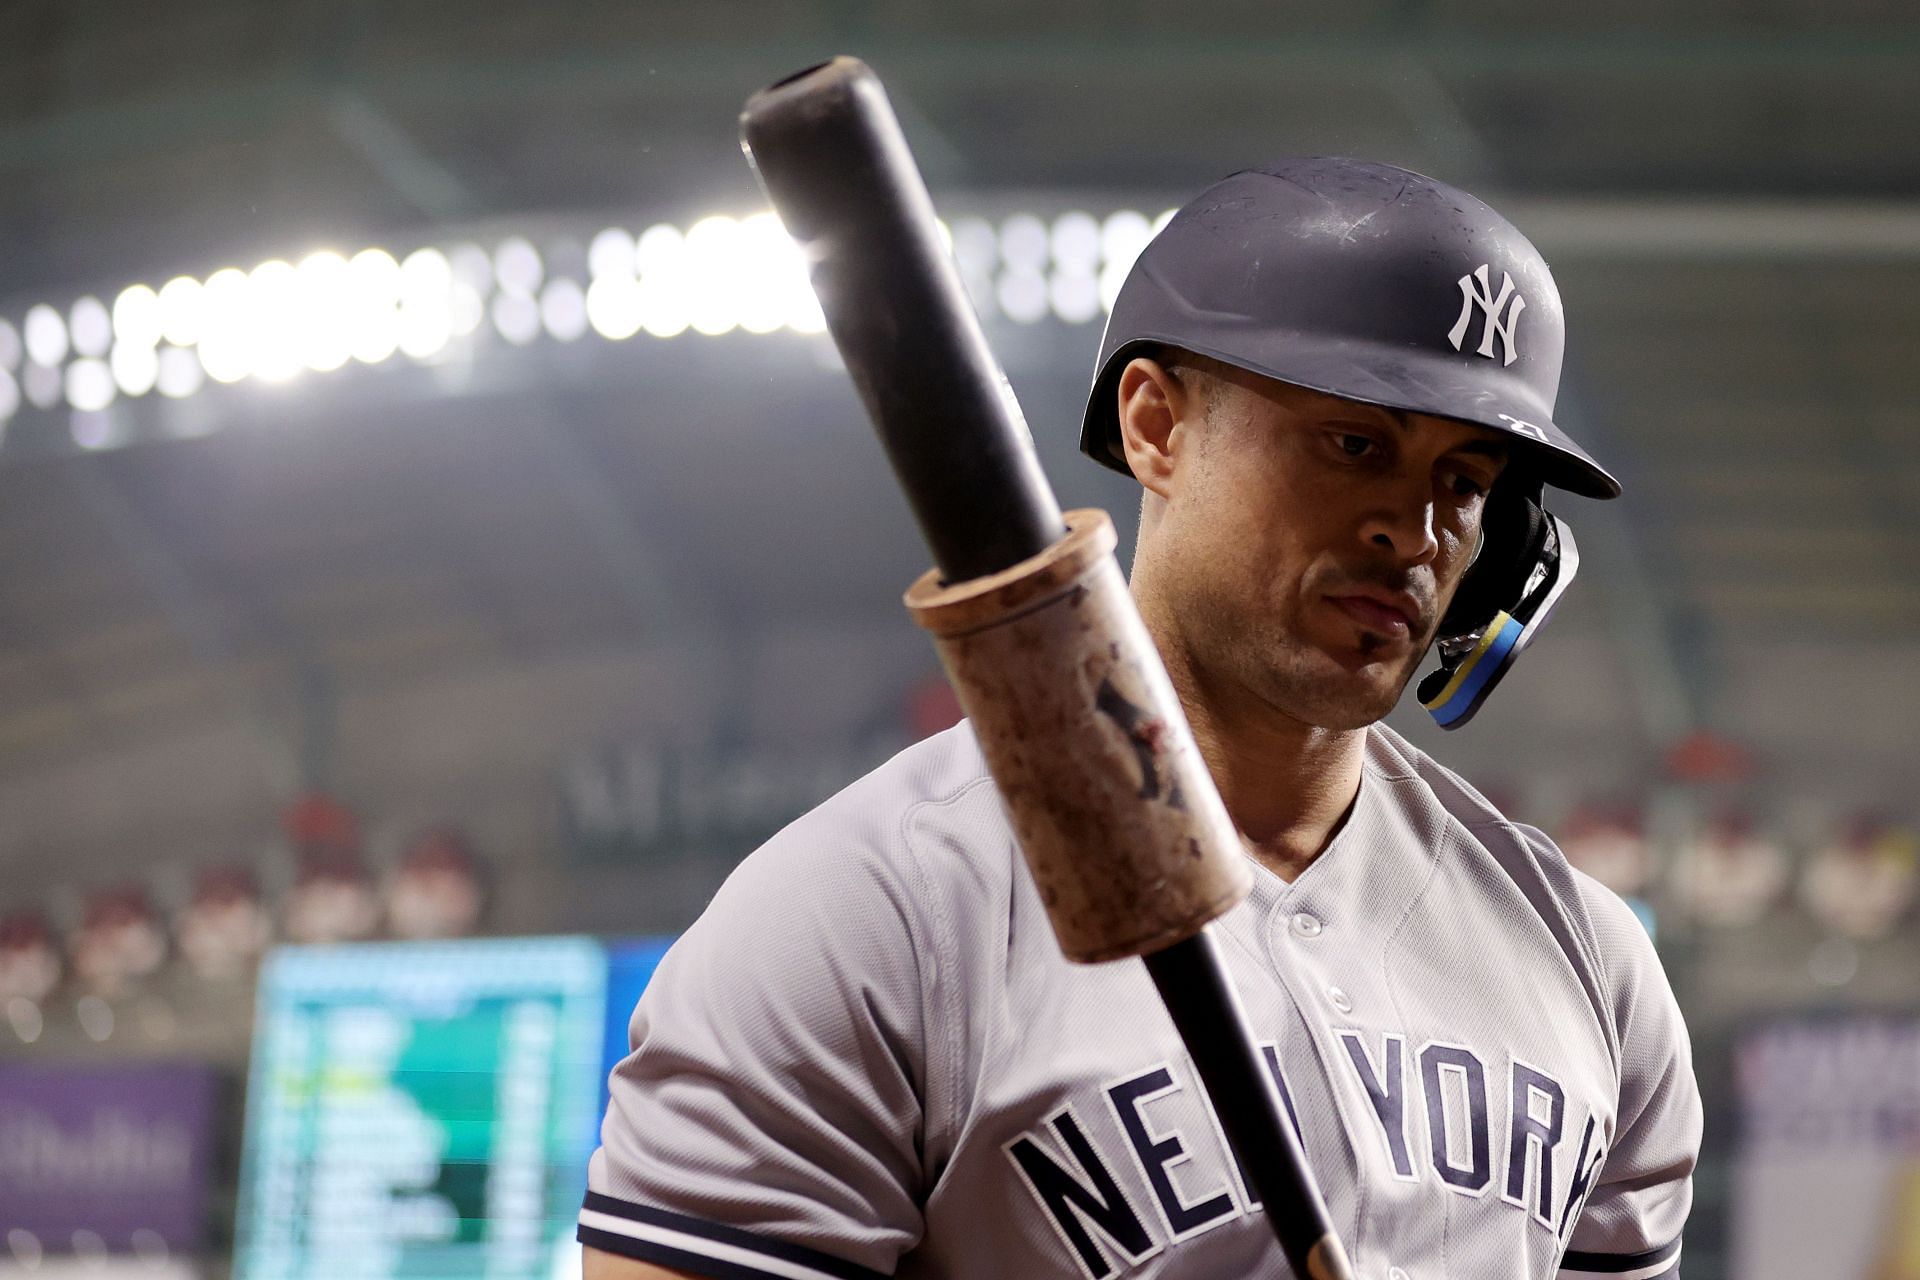 Giancarlo Stanton and 10 Other Athletes Who Made Weird Name